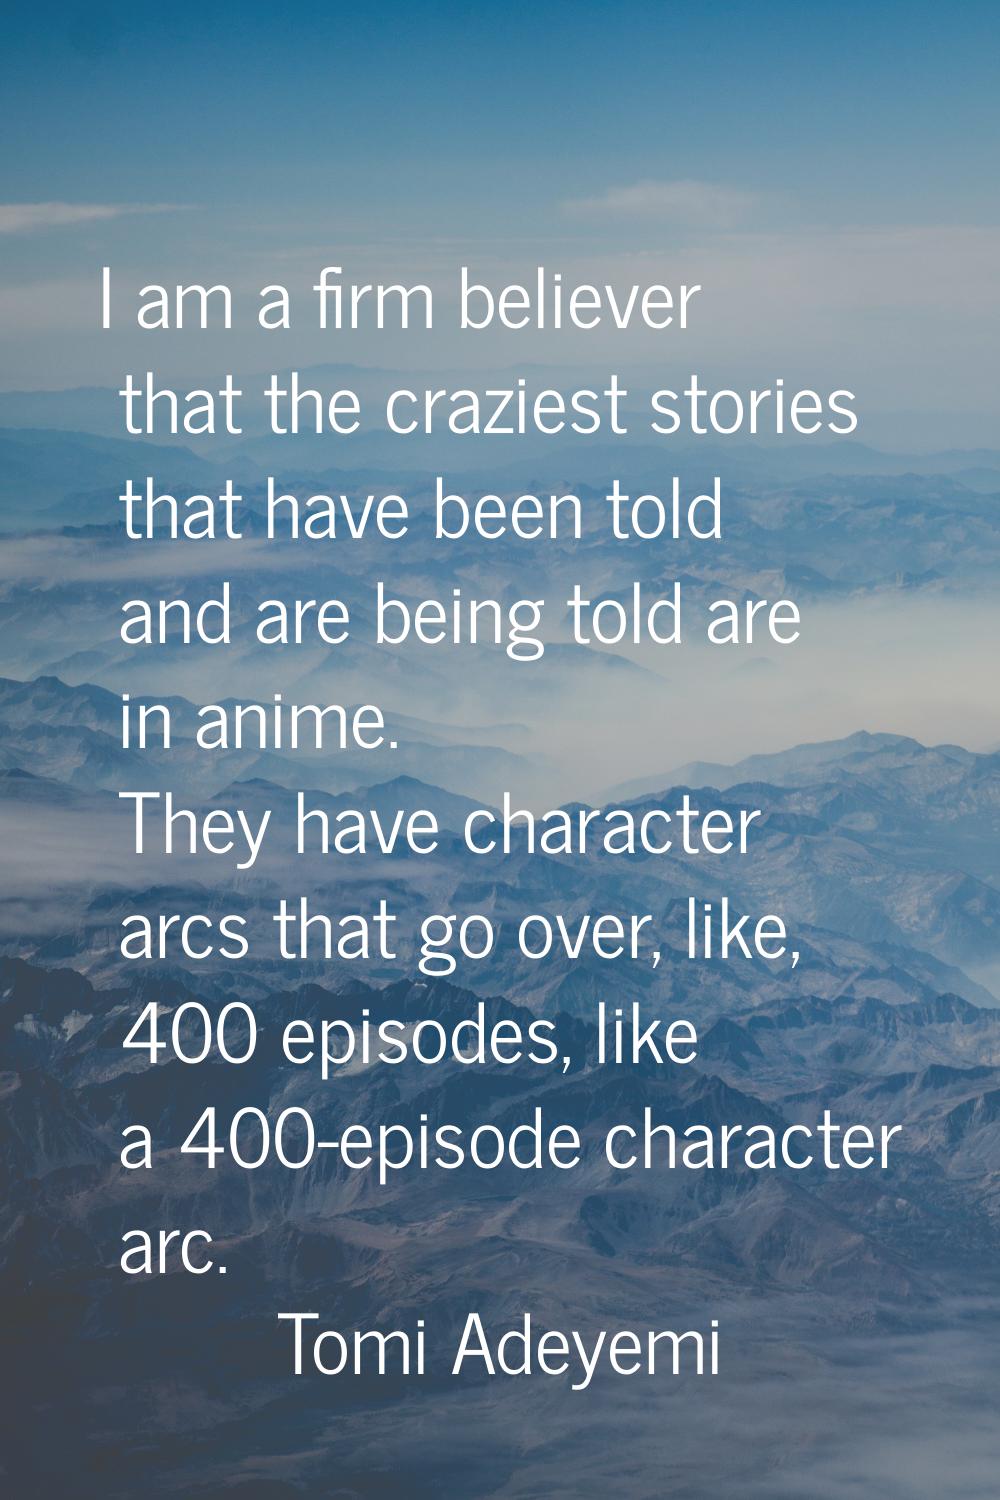 I am a firm believer that the craziest stories that have been told and are being told are in anime.